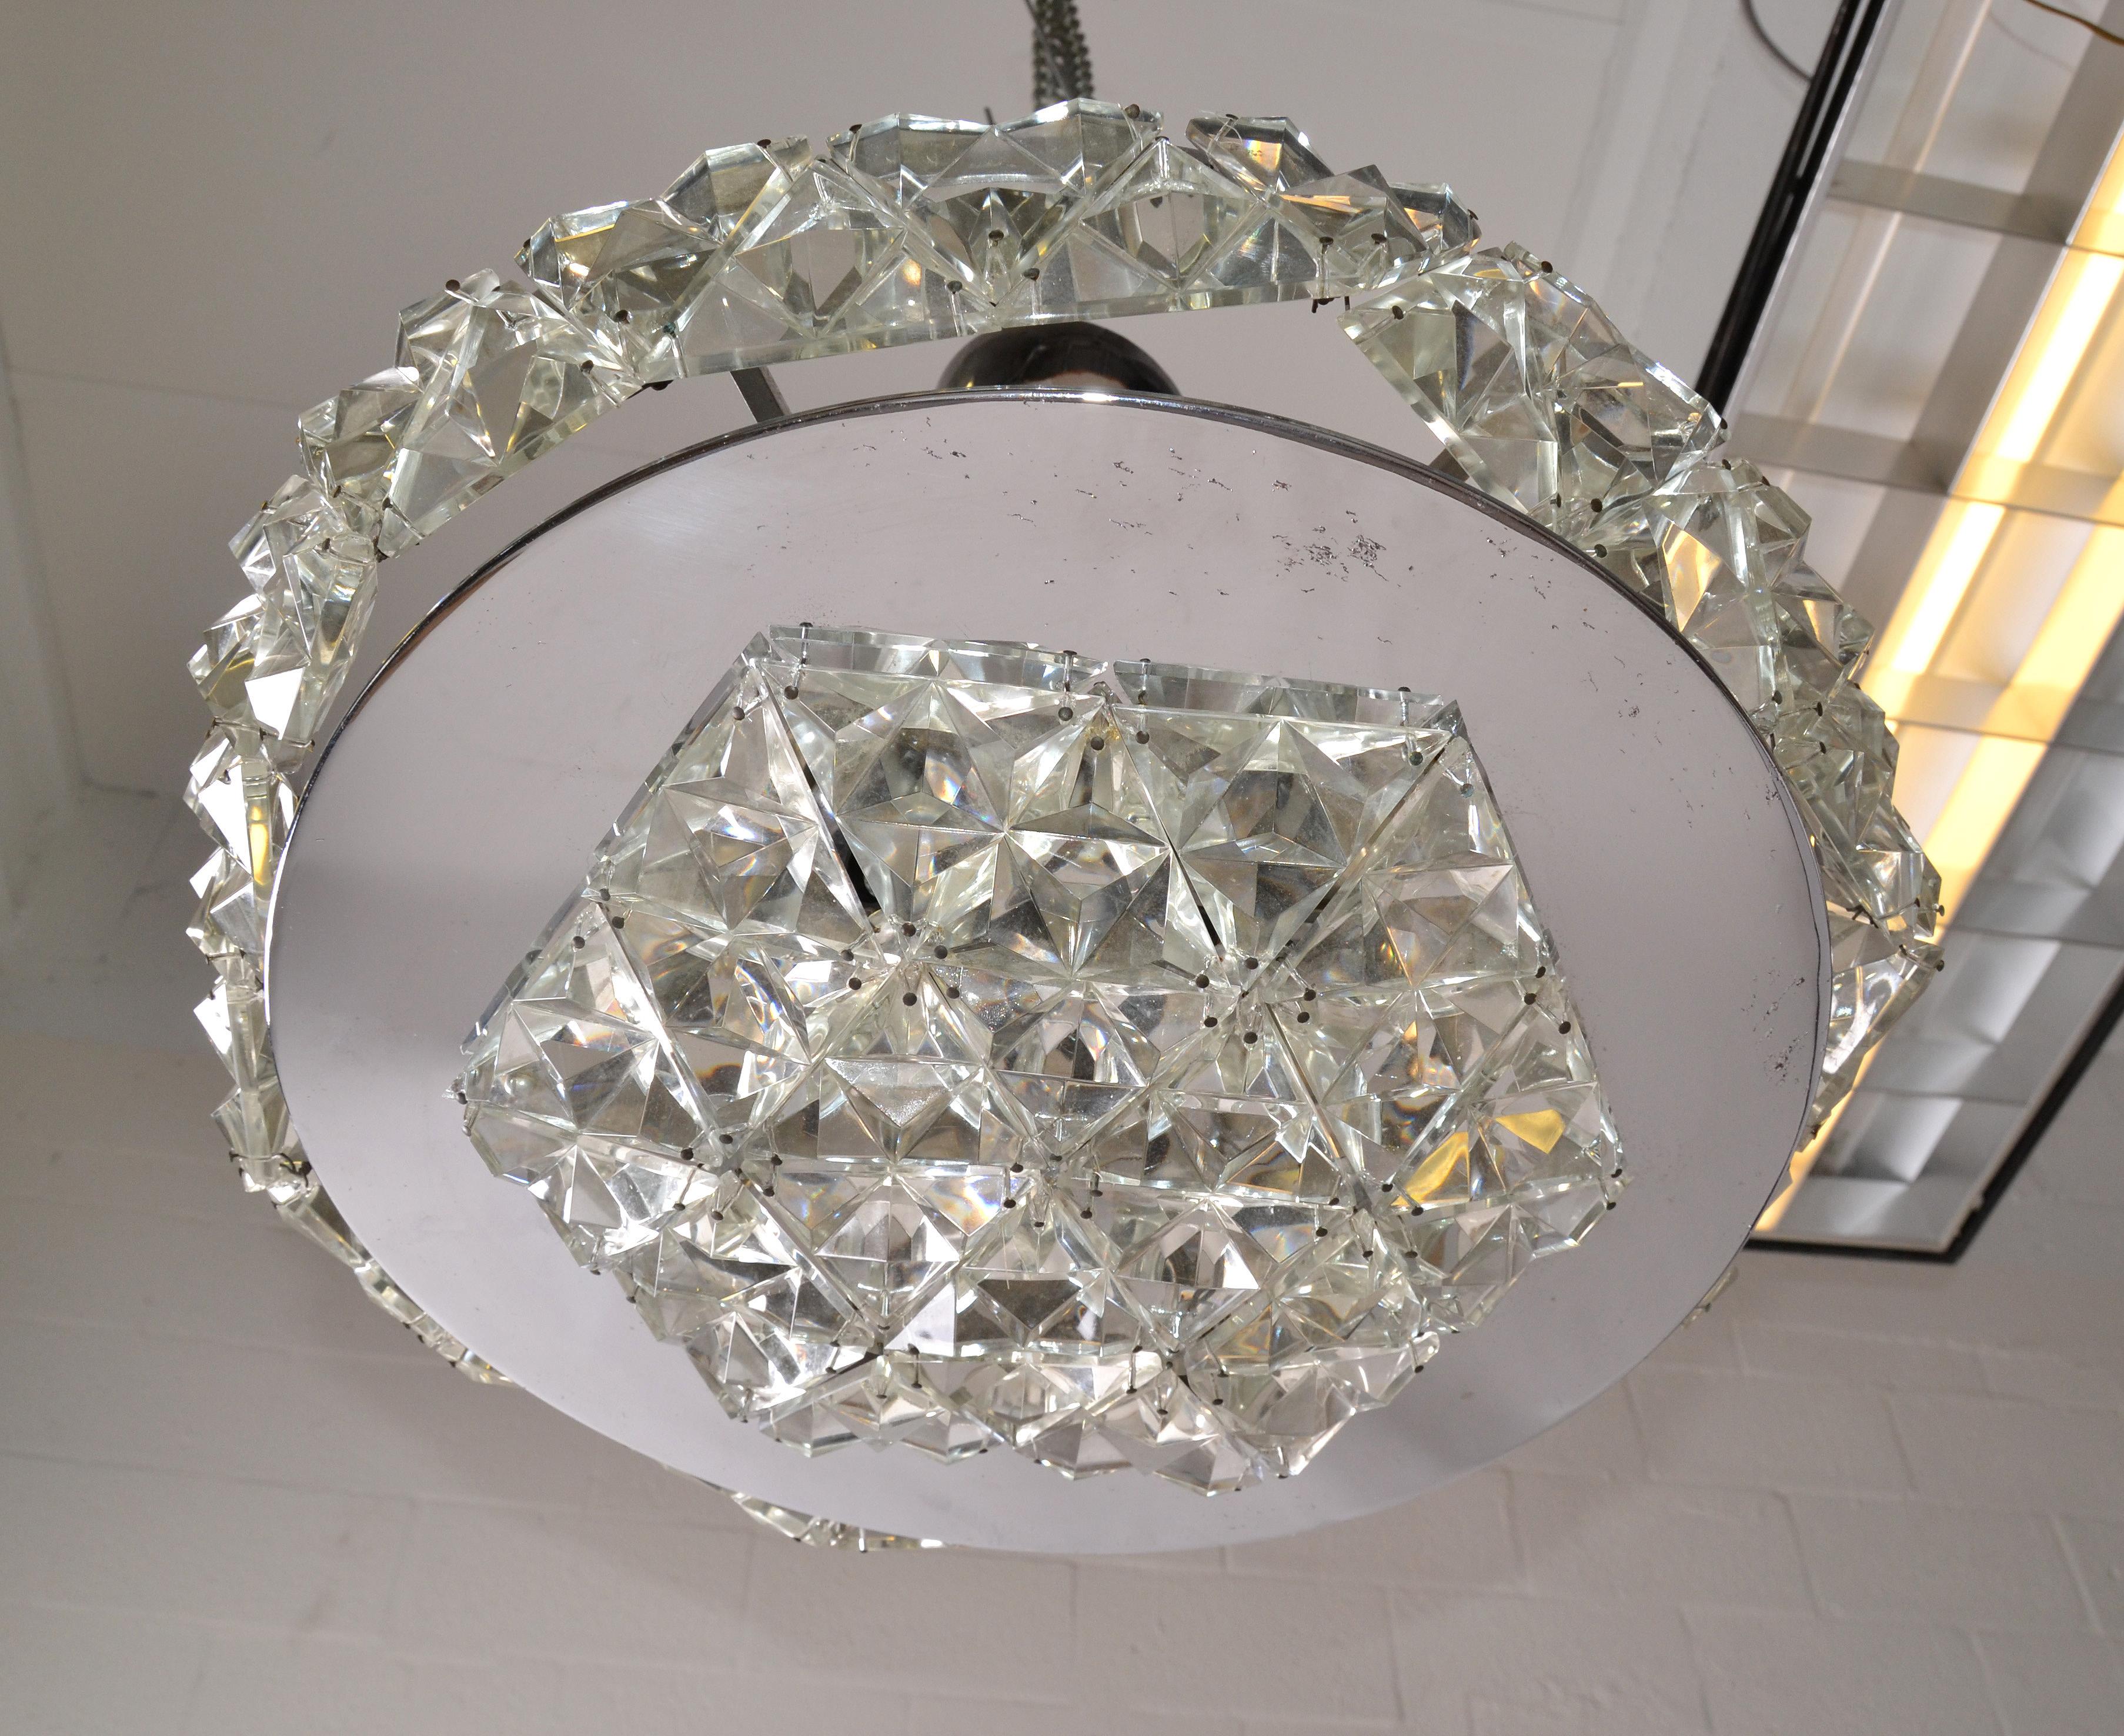 Mid-Century Modern Chrome and Crystal Flushmount Ceiling Light Fixture, 1970s For Sale 3